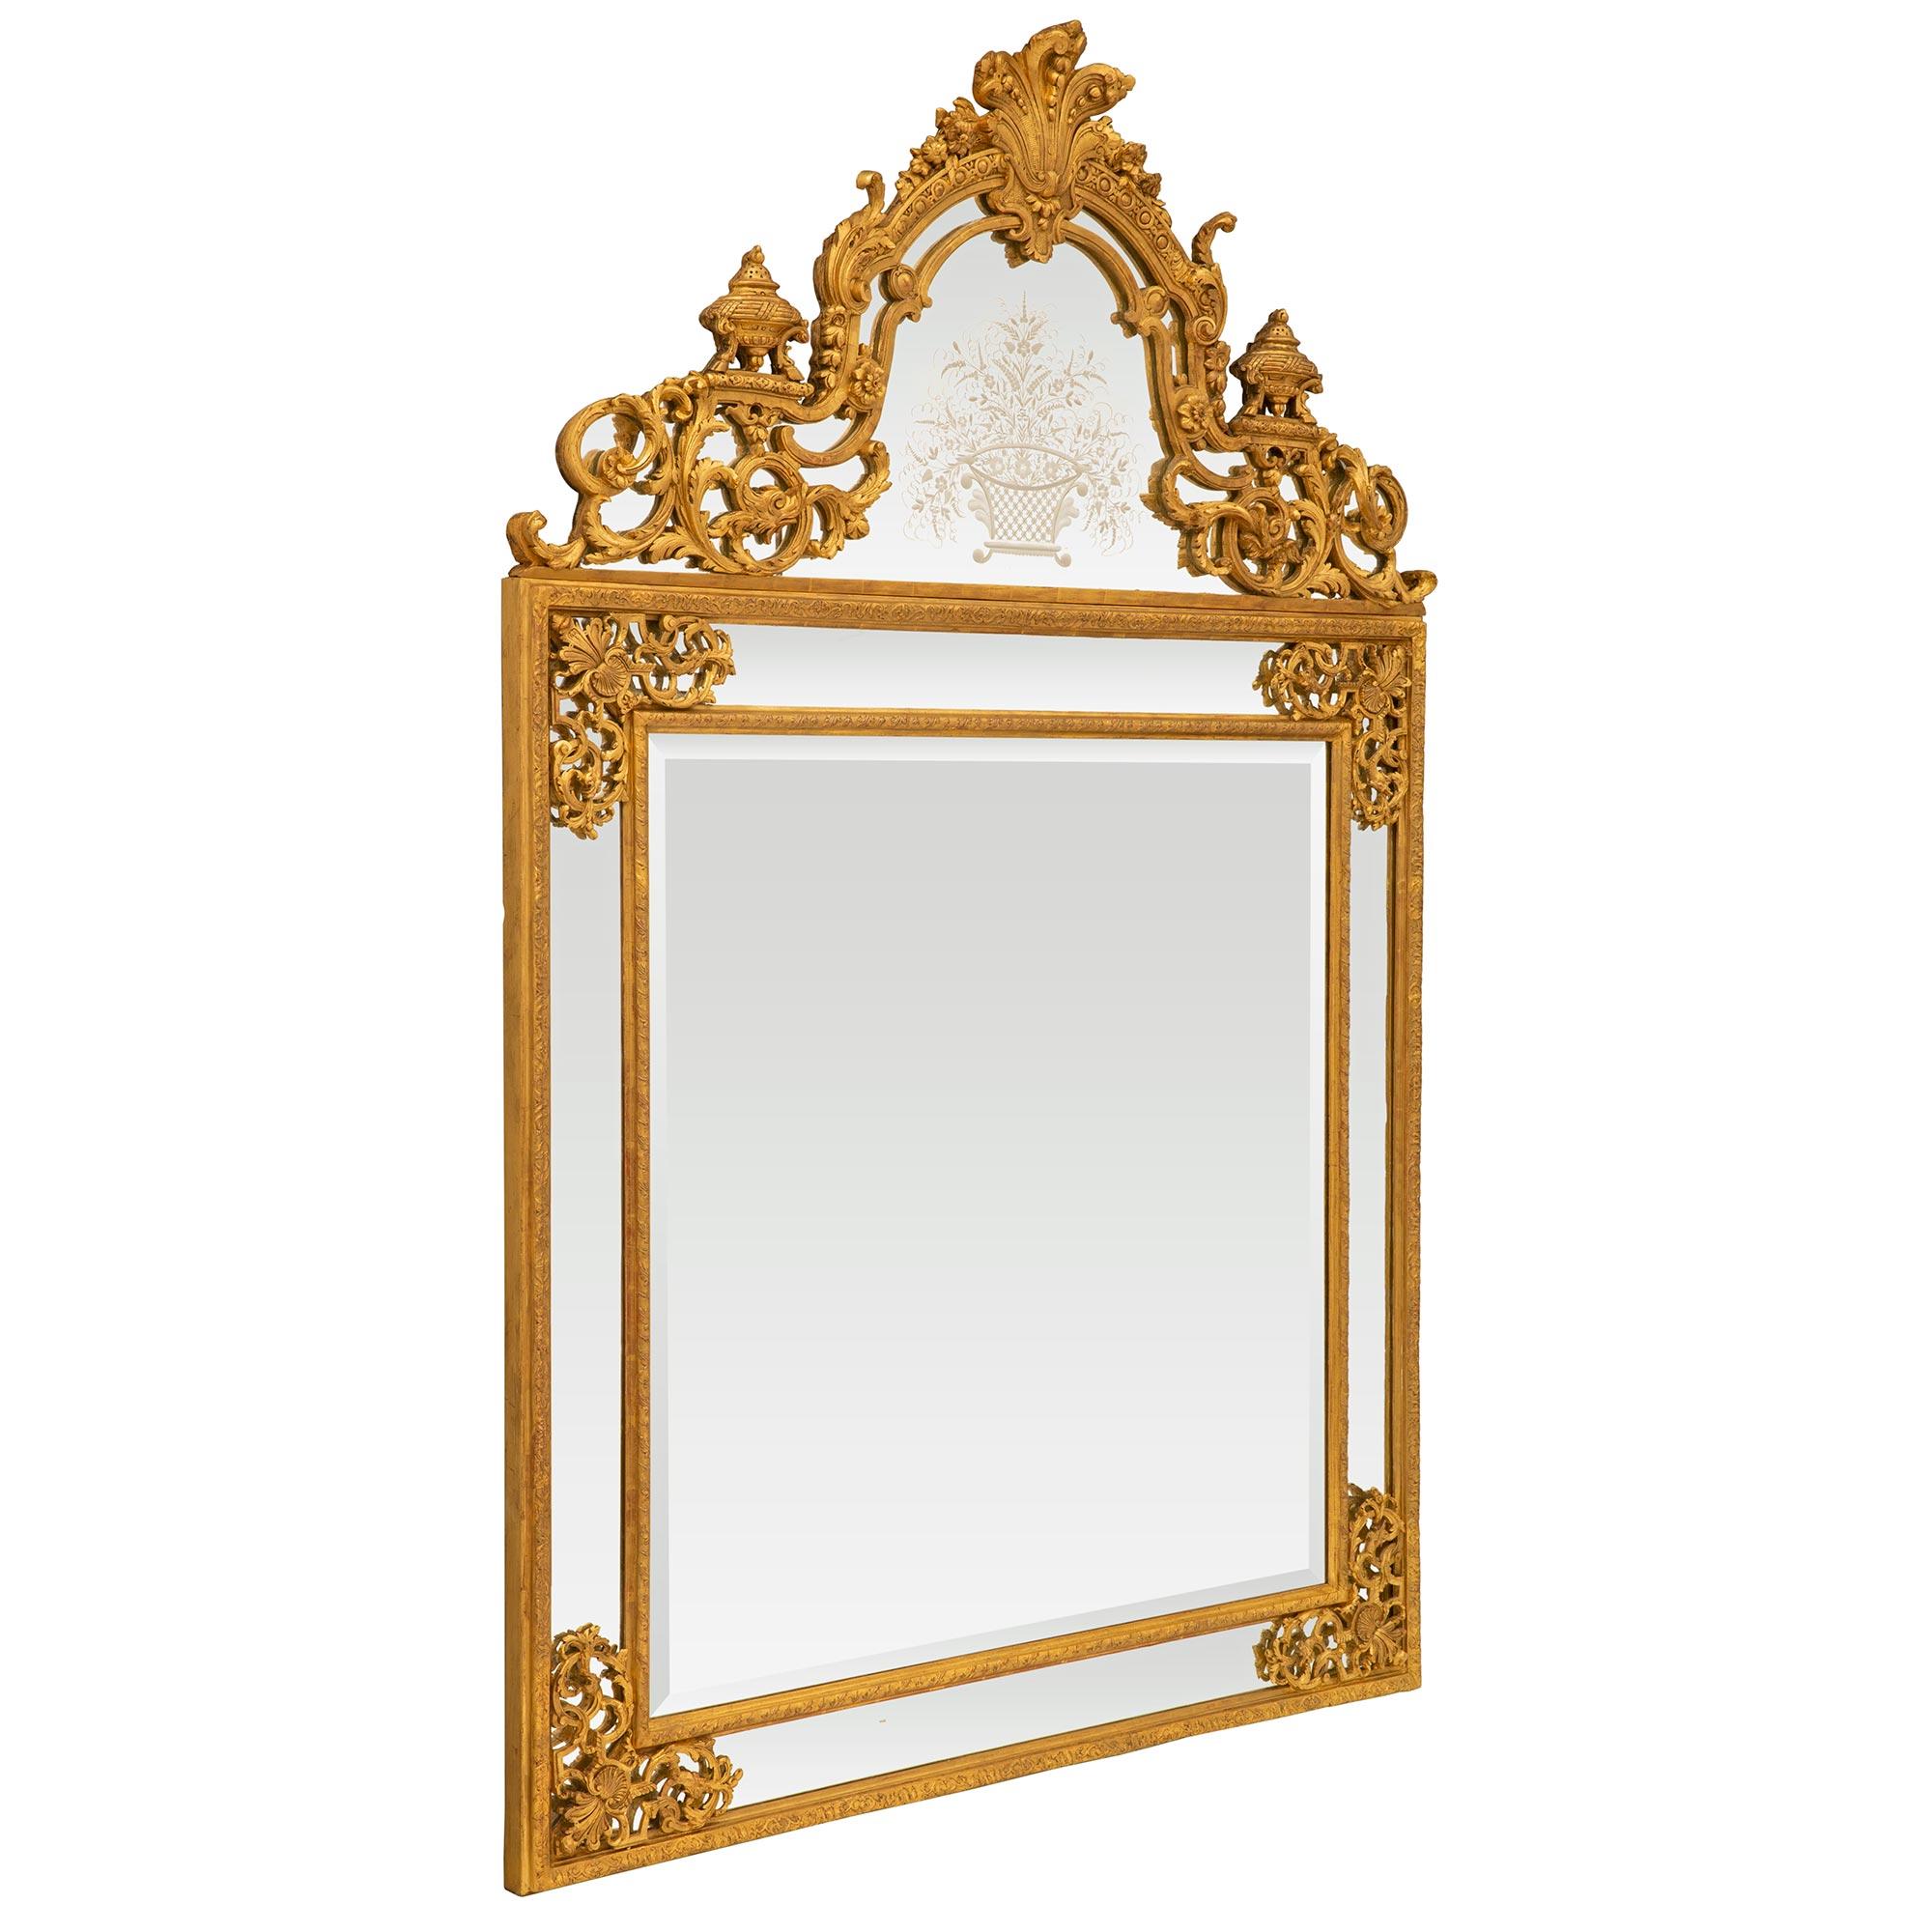 A stunning large scale French Mid-19th Century Regence St. Double framed giltwood mirror. The mirror retains all original beveled and etched mirror plates throughout each framed within Fine mottled bands with charming richly carved scrolled foliate